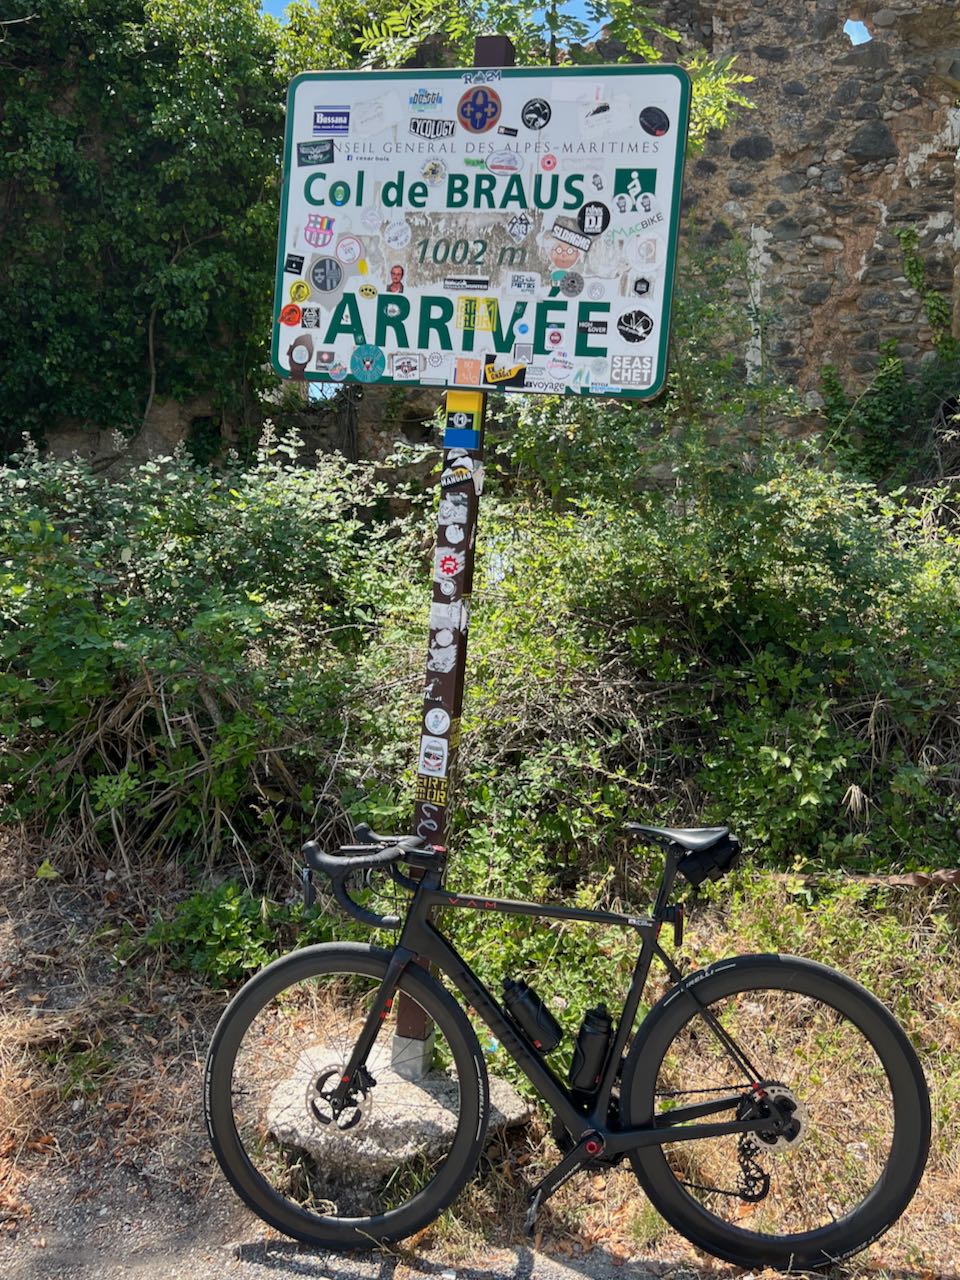 Factor O2 VAM bicycle leaning against the Col de Braus sign at the top of the climb